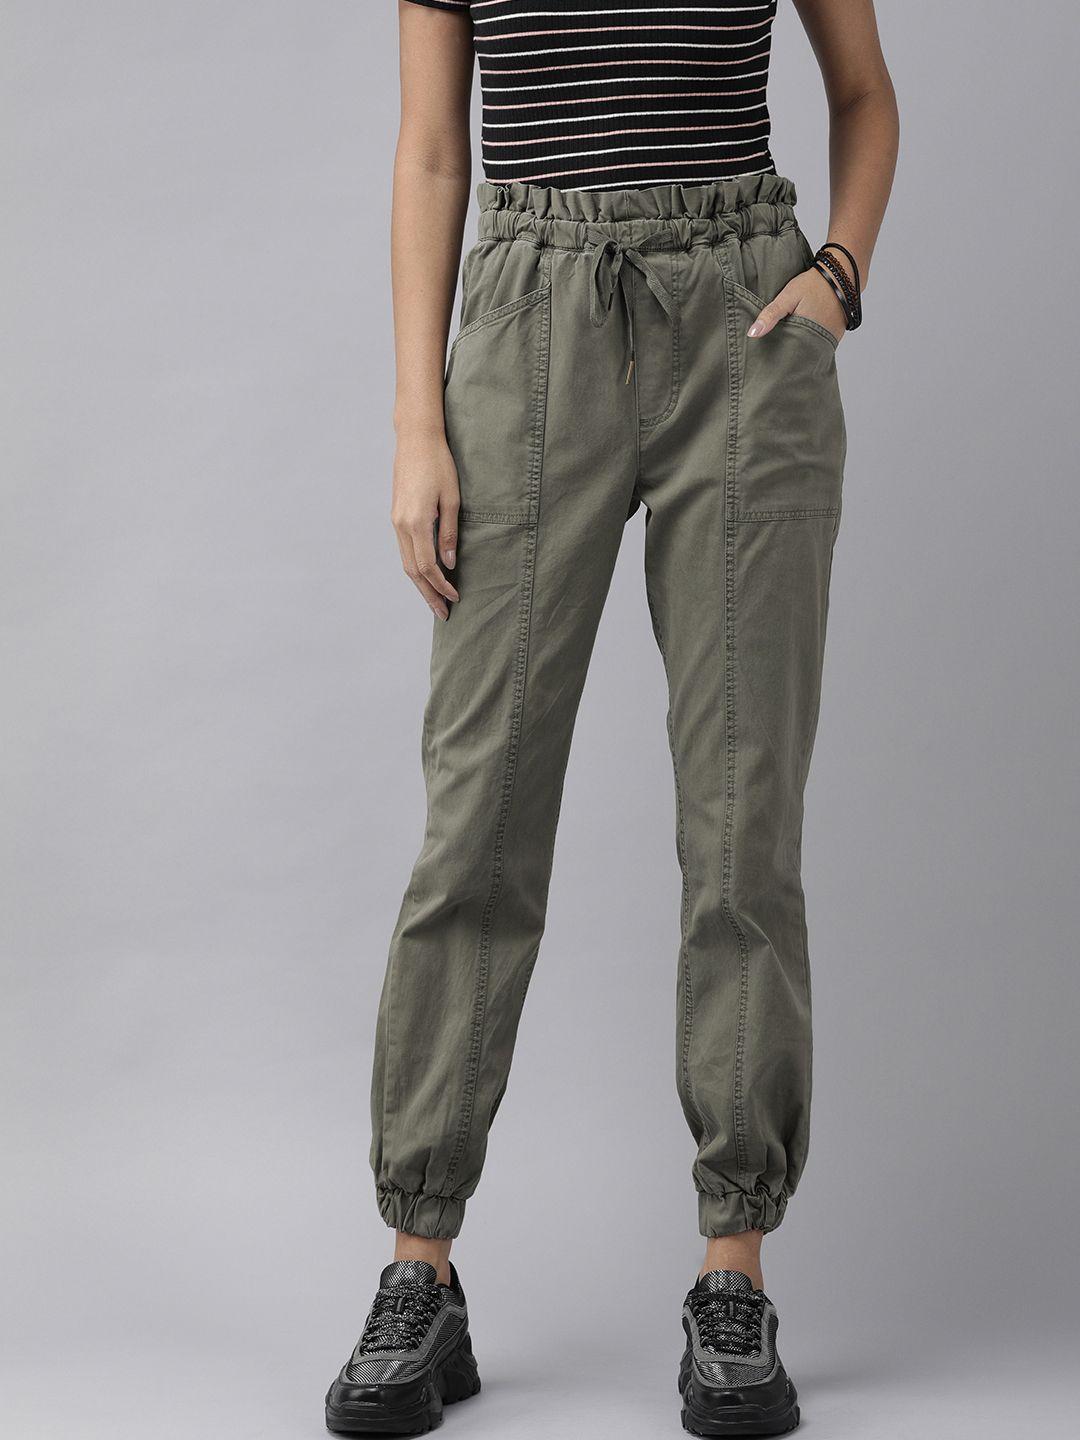 the roadster lifestyle co women green paper bag joggers trousers